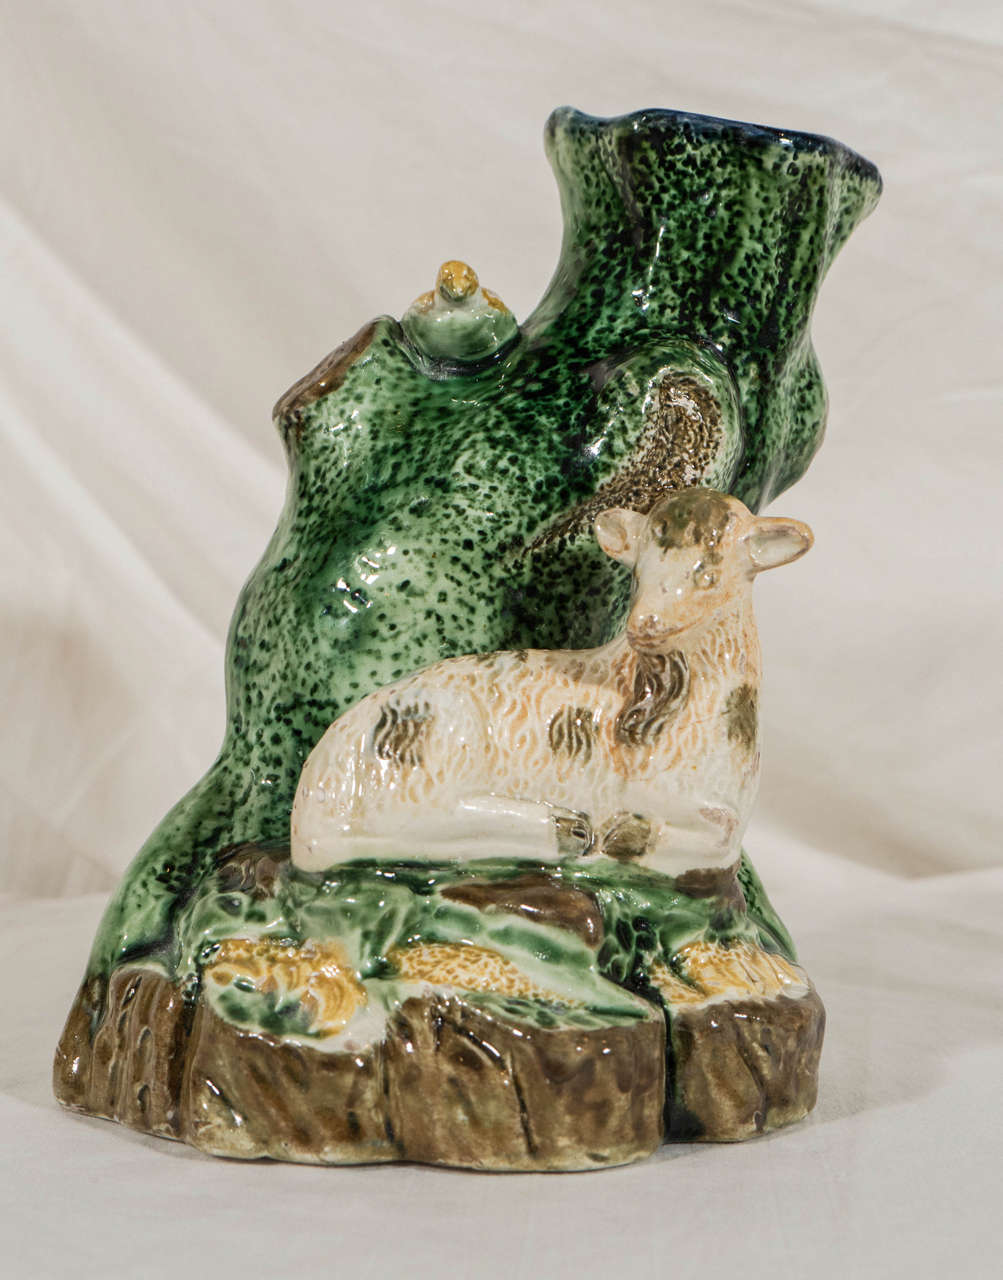 The charm of this Staffordshire spill vase is it's Folk Art style using simple forms depicting a scene from everyday country life: A lamb resting at the base of a tree. Despite the simple style of the figure the lambswool and the trunk of the tree